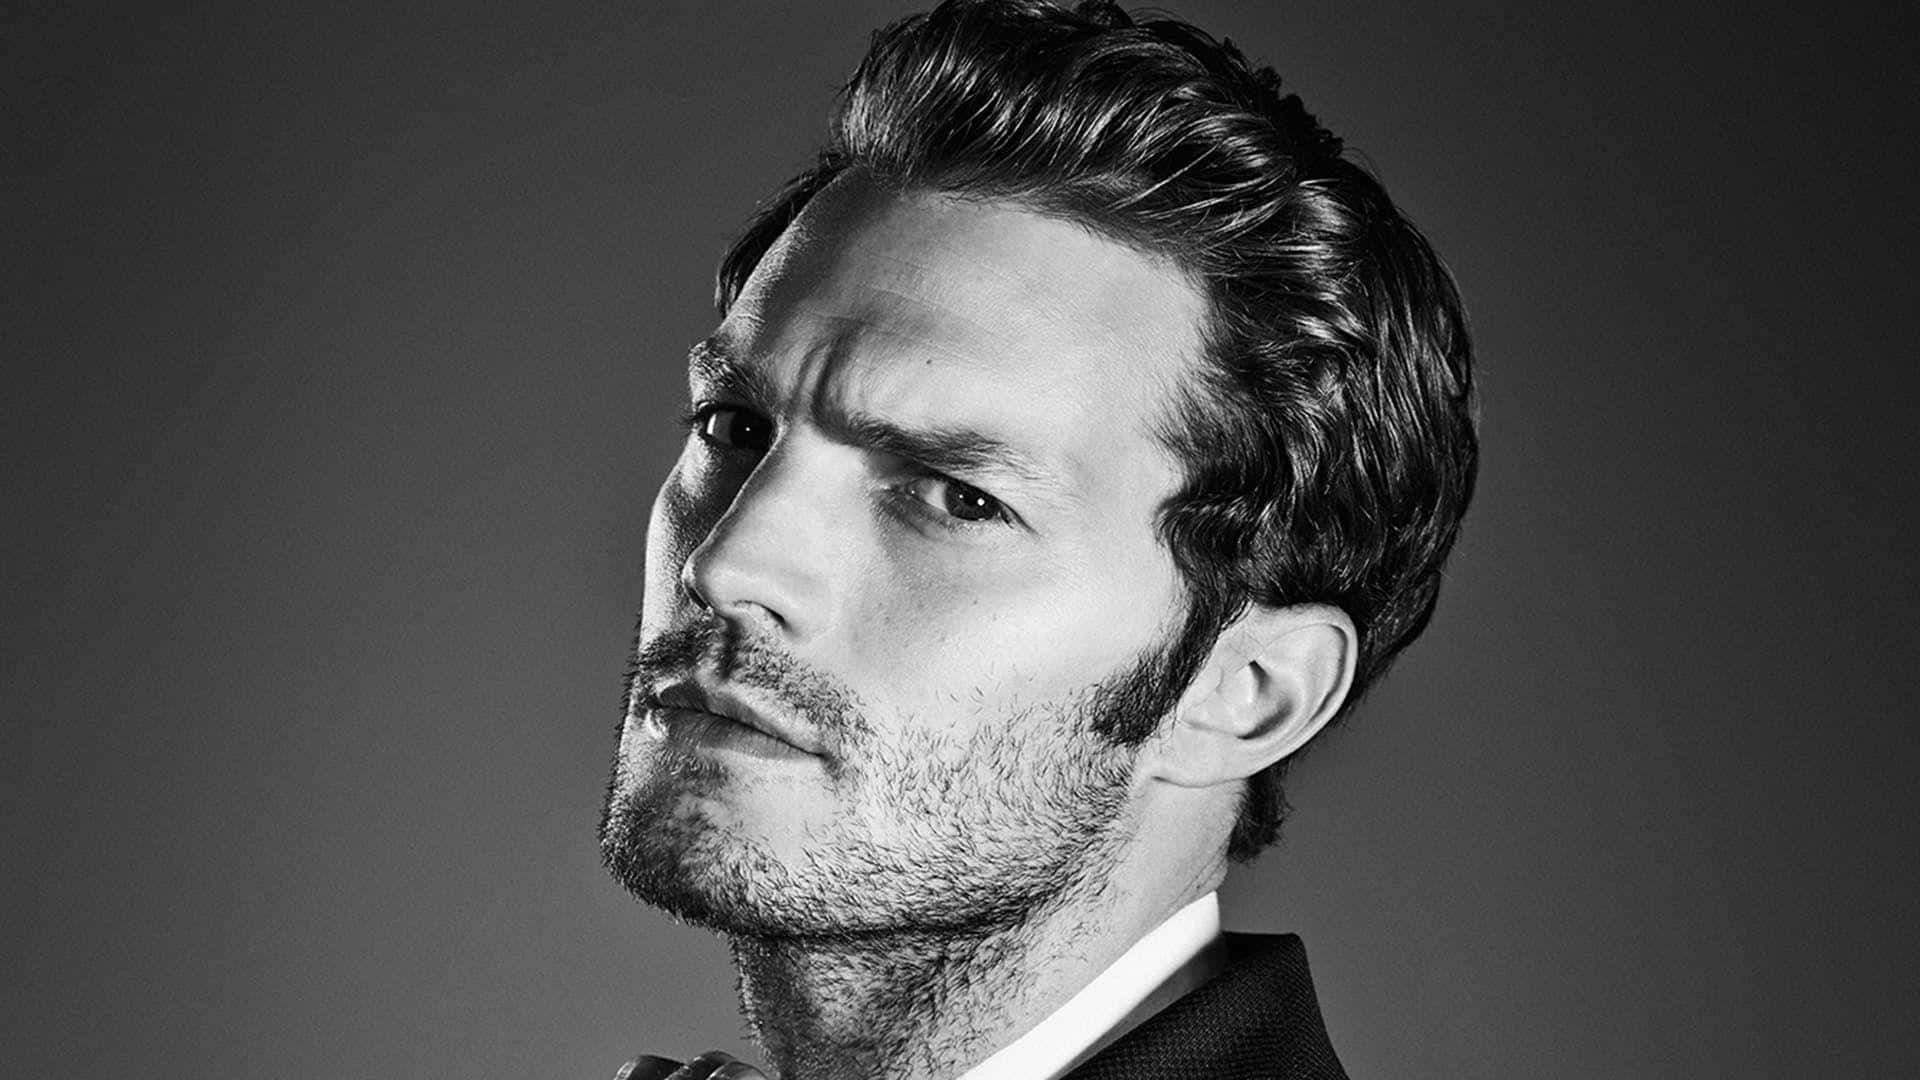 Jamie Dornan Captivating In Black And White Photography Wallpaper